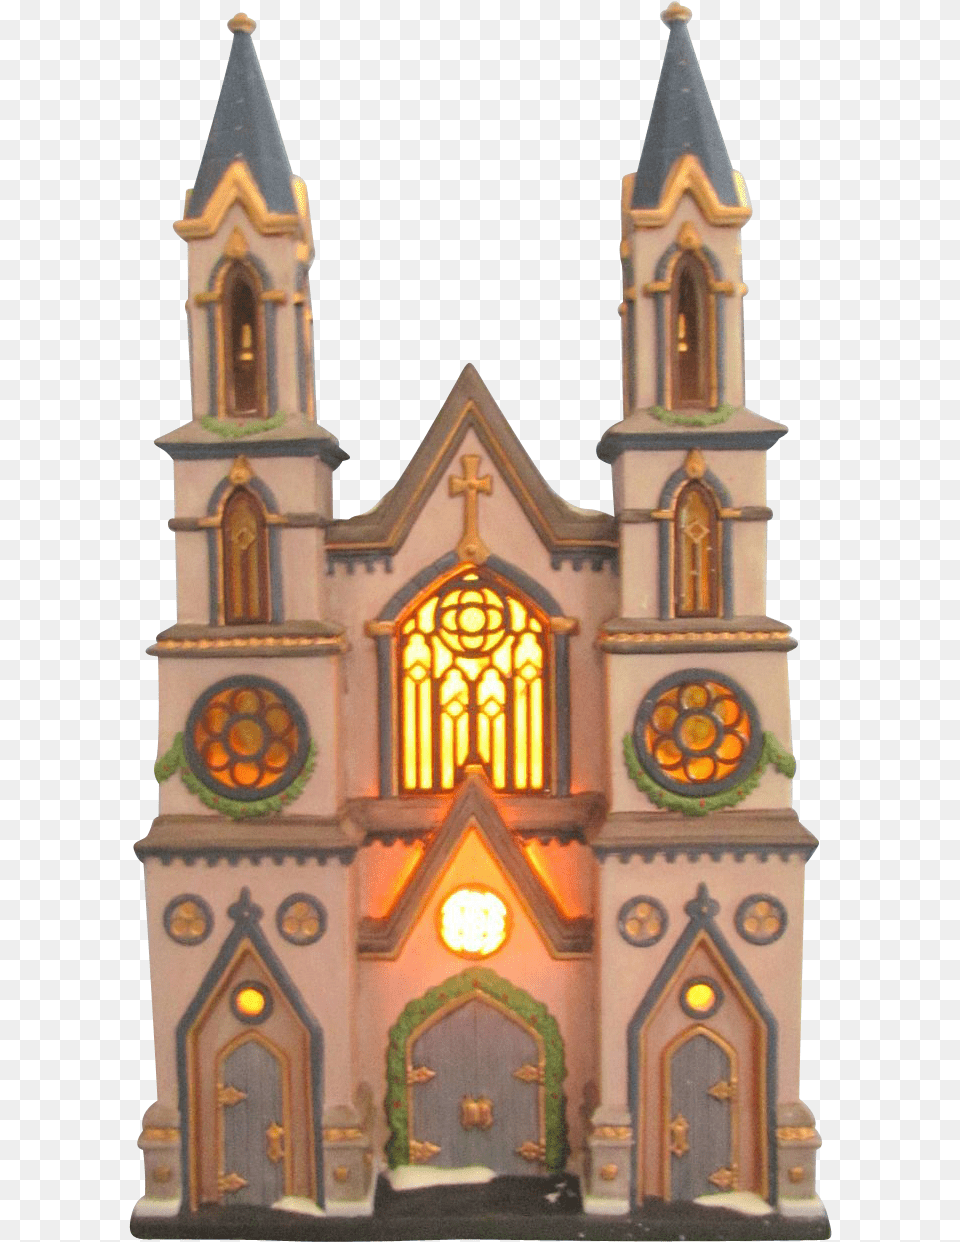 Transparent Background Church, Architecture, Building, Cathedral, Spire Png